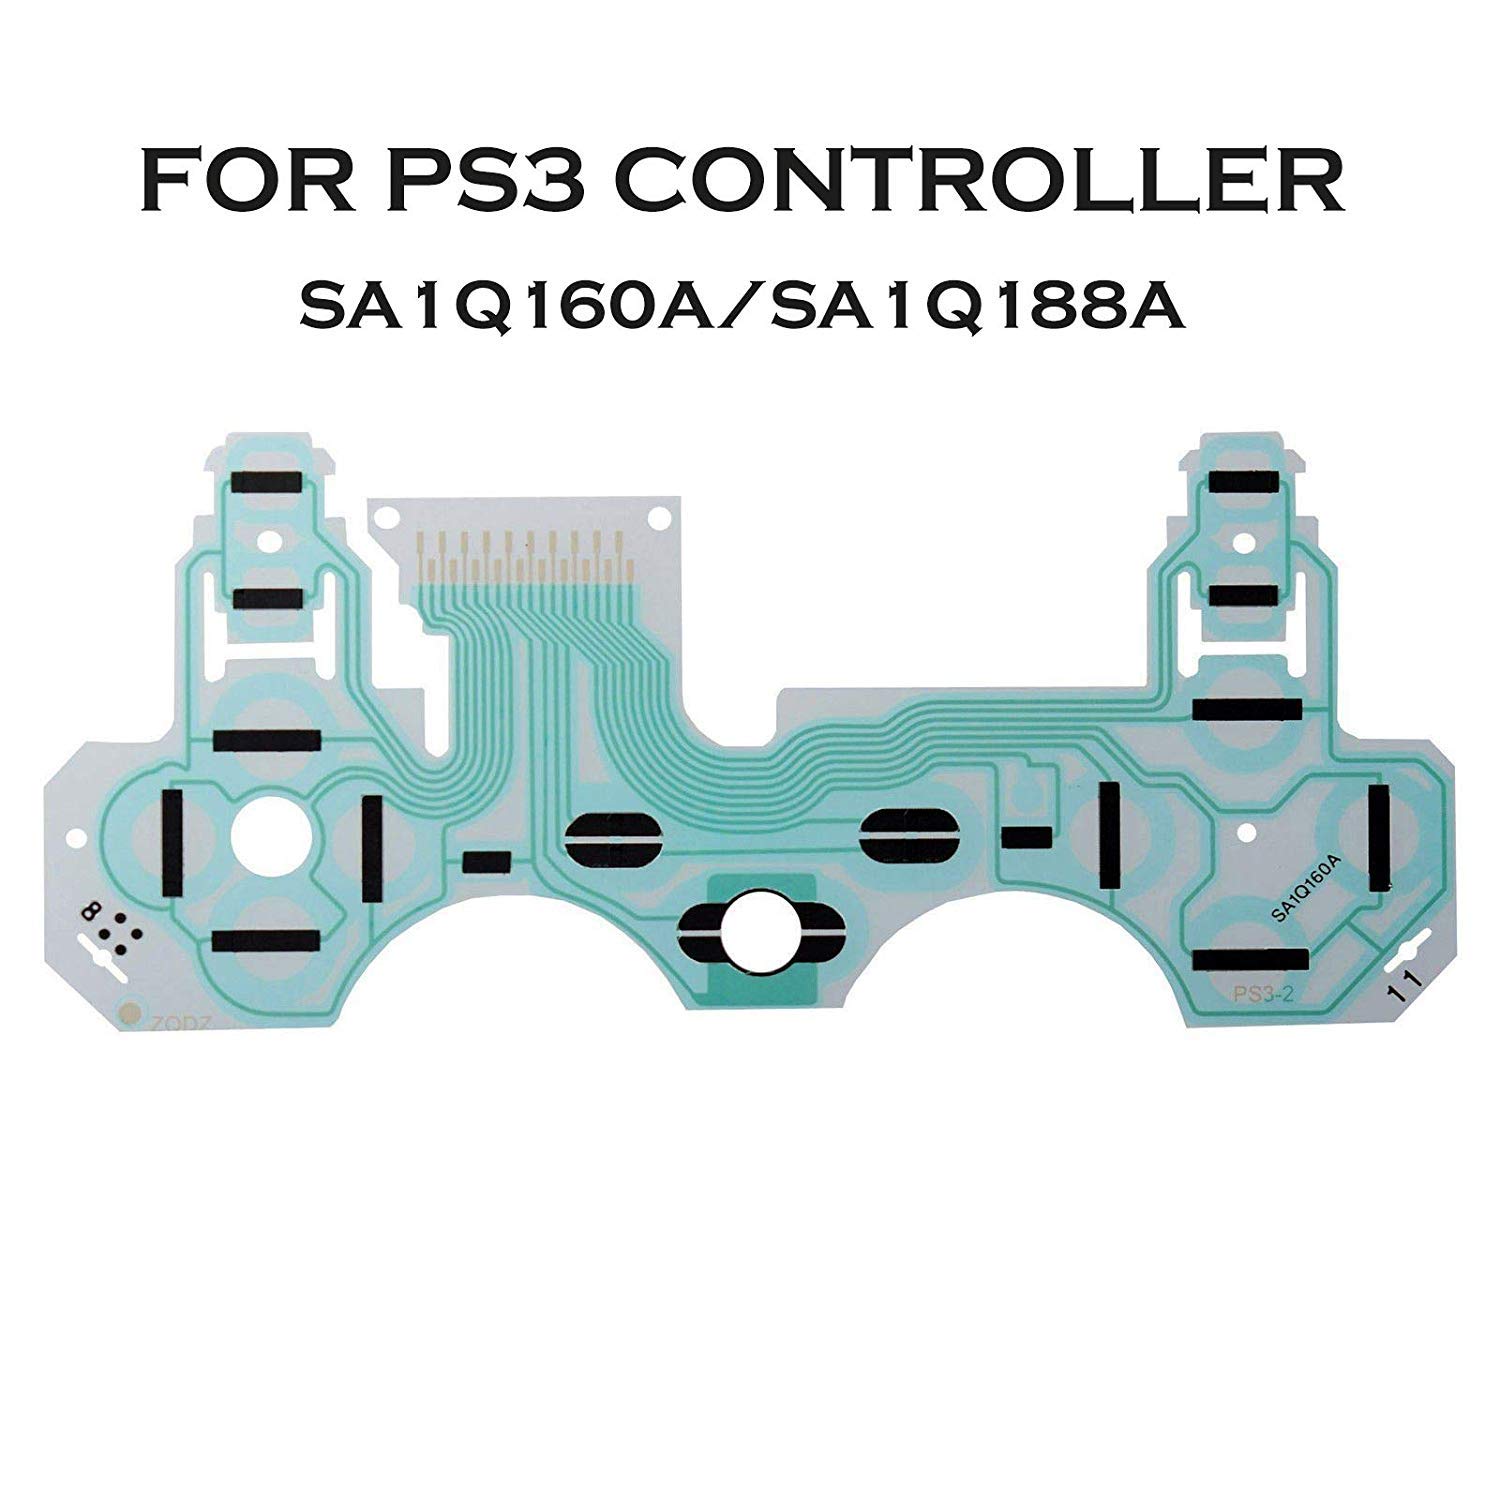 Replacement Board Button Ribbon Cable Conductive Film Sheet for PS3 Wireless Controller – SA1Q160A/SA1Q188A [video game]